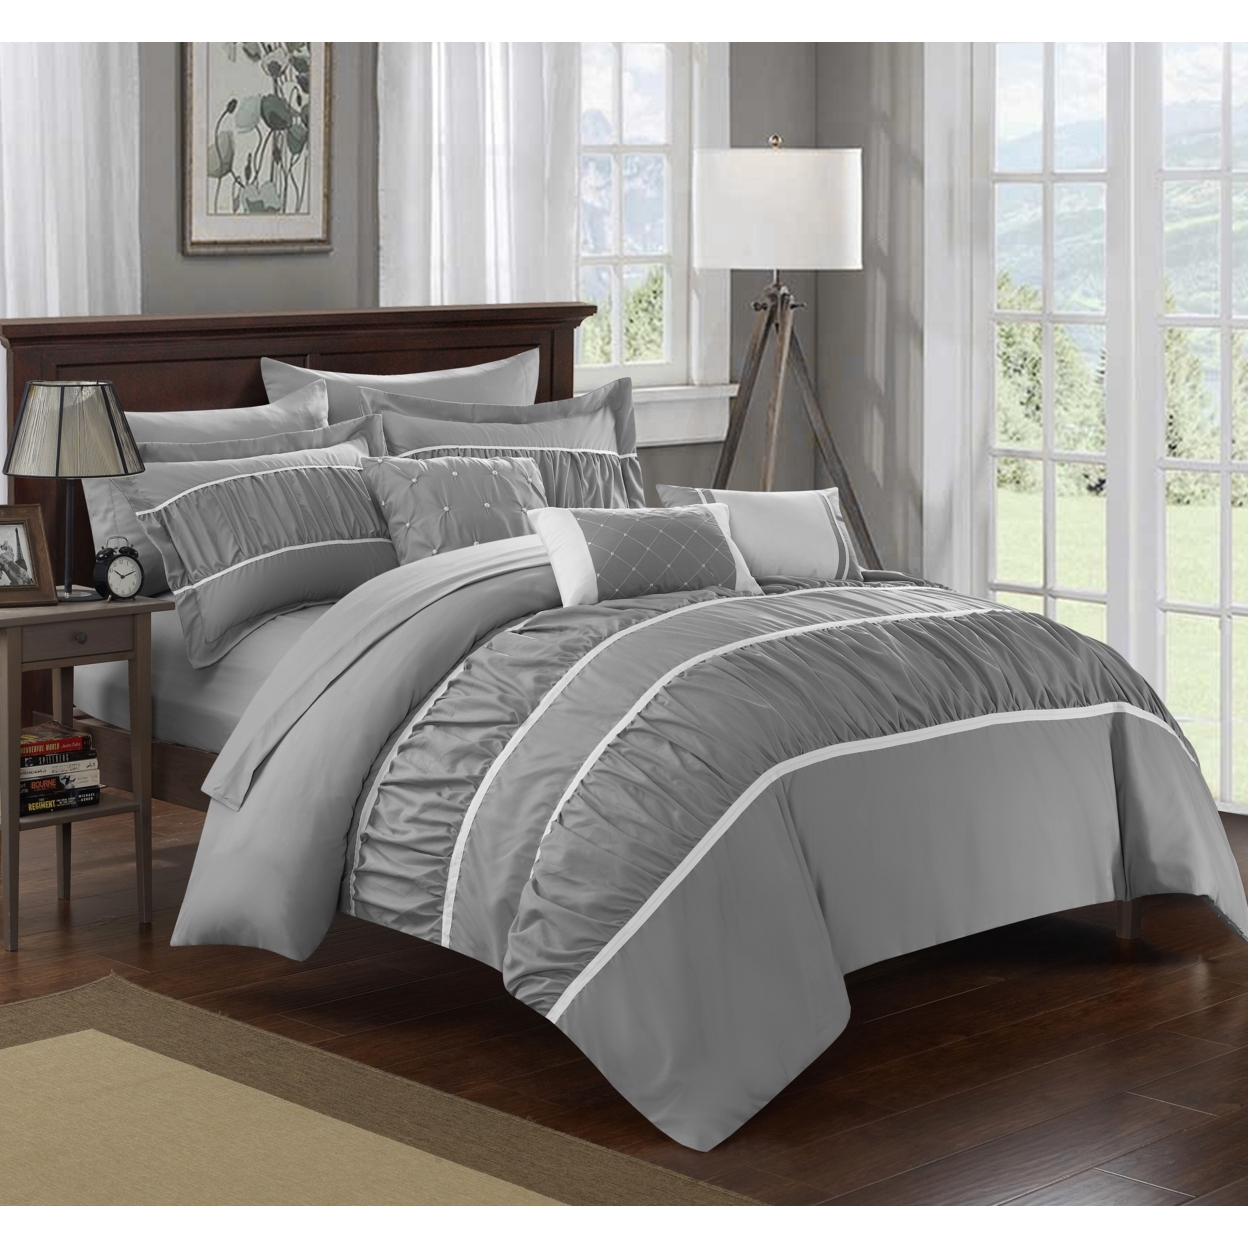 10-Piece Aero Pleated & Ruffled Bed In A Bag Comforter And Sheet Set - Grey, Queen